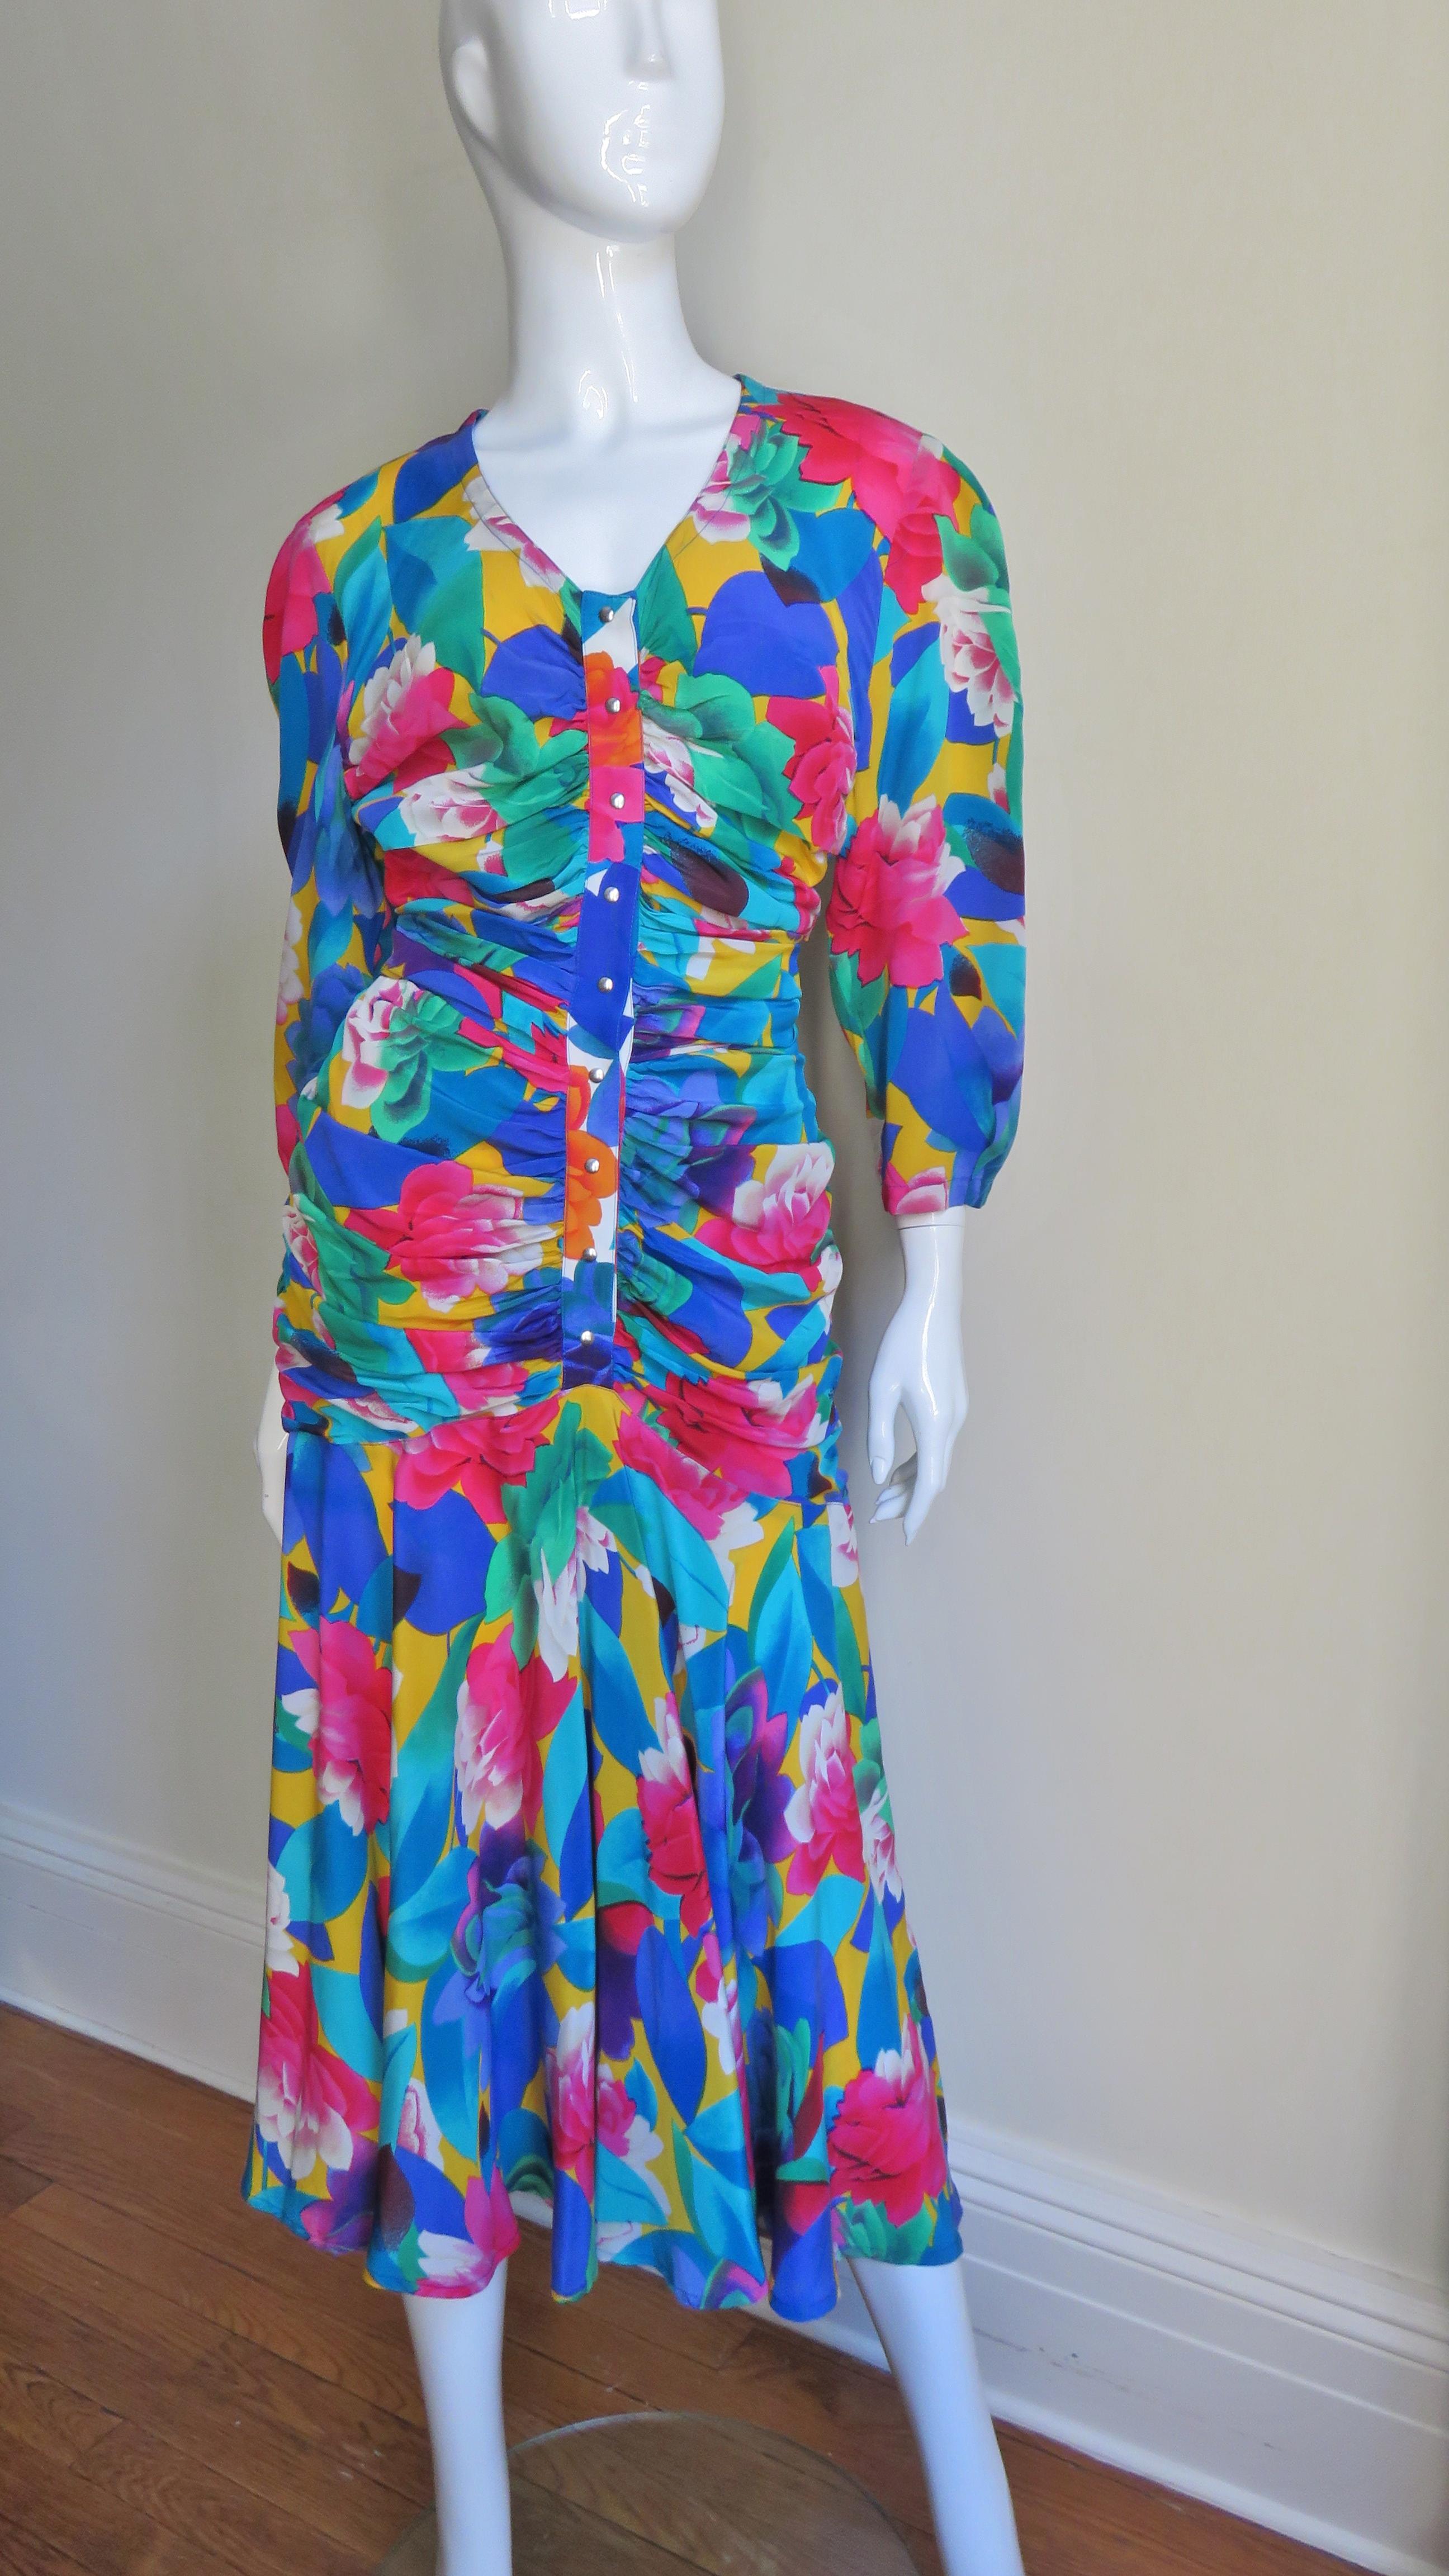 A brightly colored flower pattern silk dress from Thierry Mugler in blues, greens, pinks and yellow.  It has a V neck, 3/4 length sleeves and snaps along the center front of the ruched bodice.  There is a ruched cummerbund at the waist which wraps